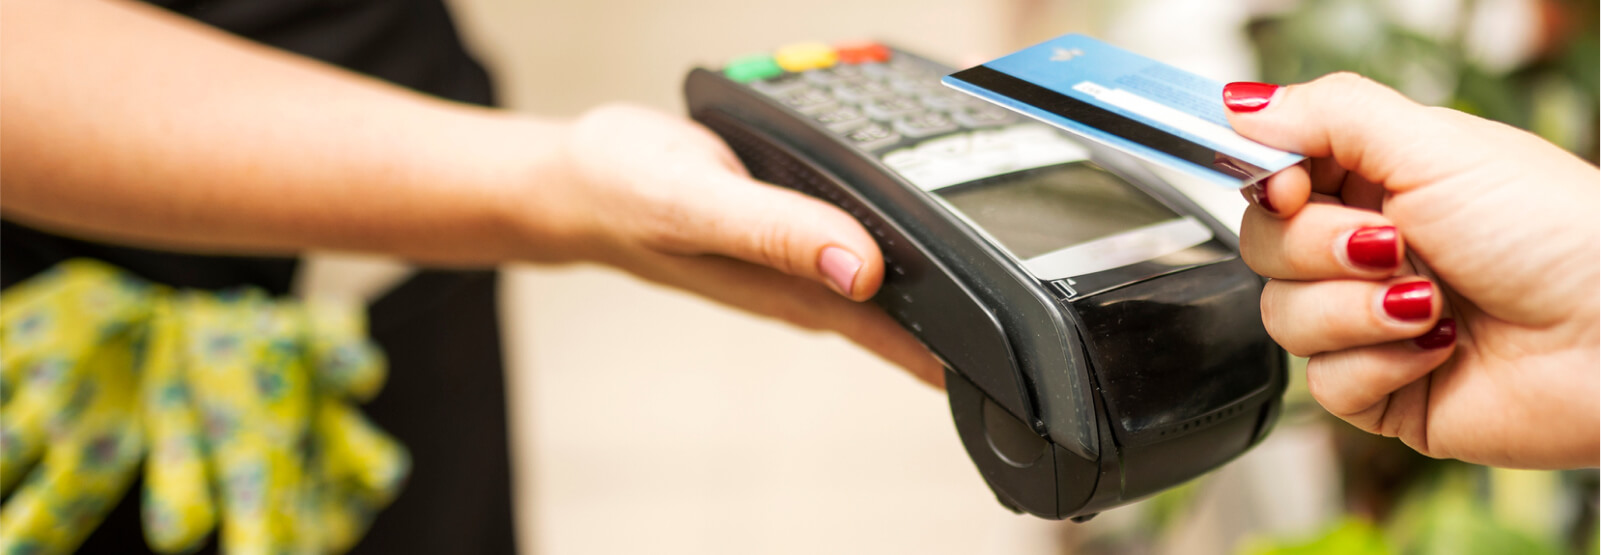 person using a debit/credit card for payment